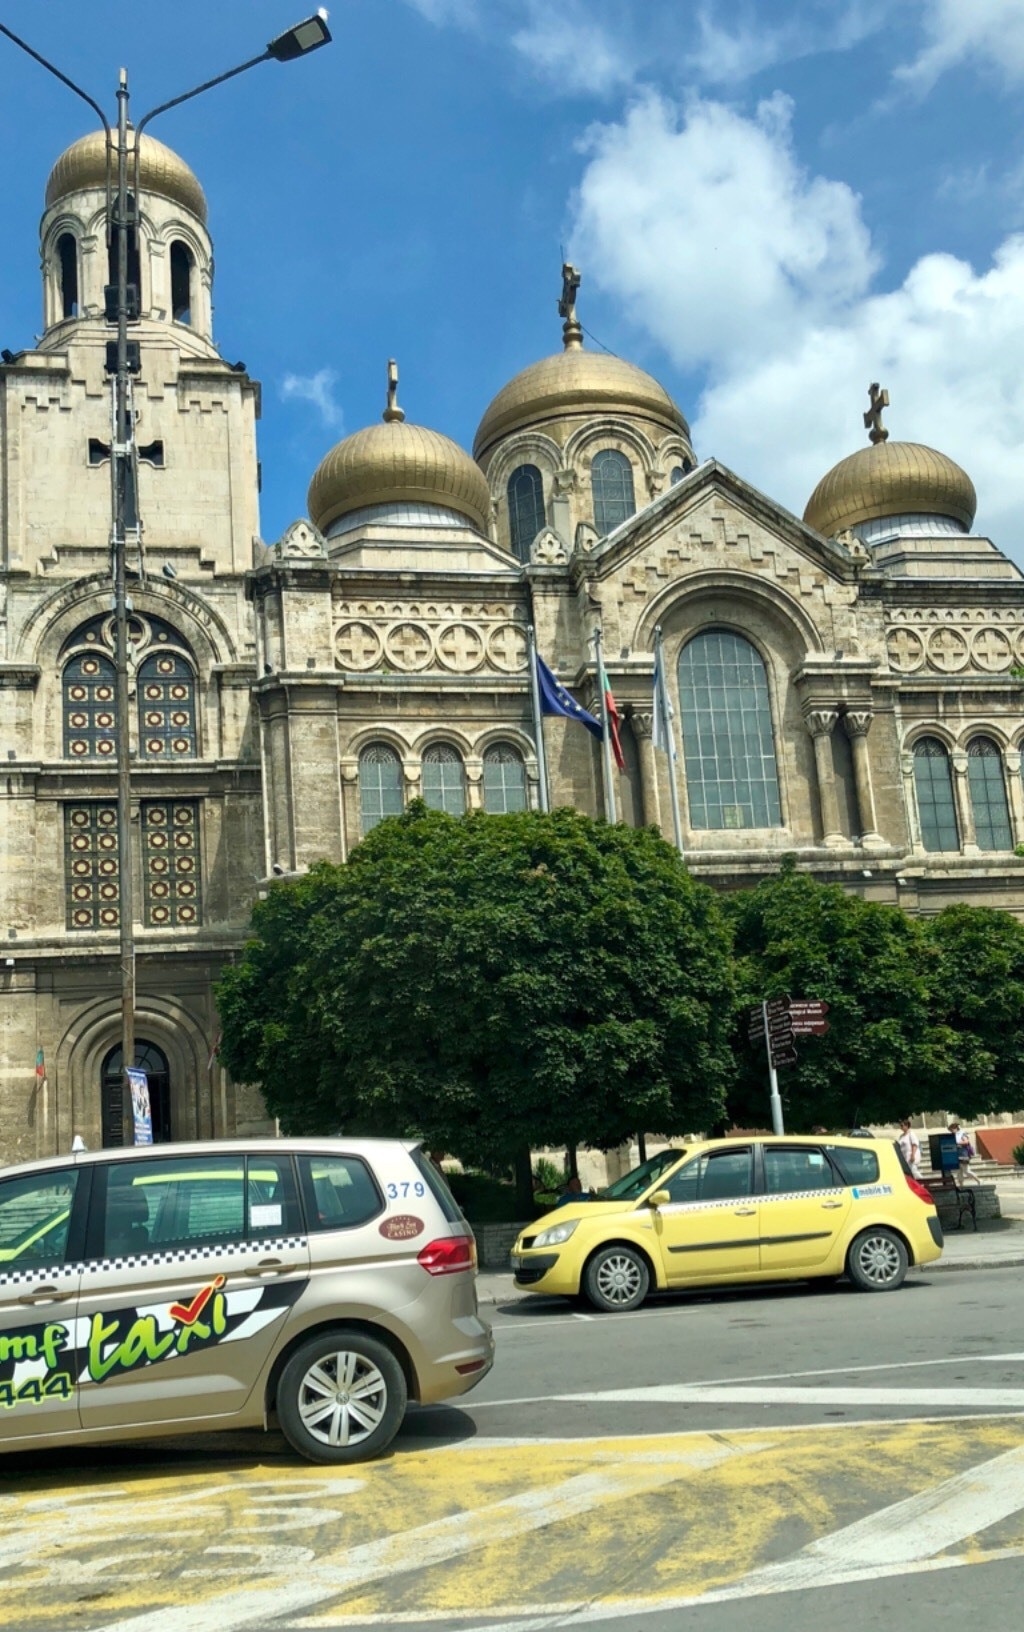 Built between 1880 and 1886, The Cathedral is Varna’s biggest Bulgarian Orthodox temple and the second largest in the country, too. The stone building is so big that you can easily see it from any high point in the centre of town.
#temple #varna 🇧🇬